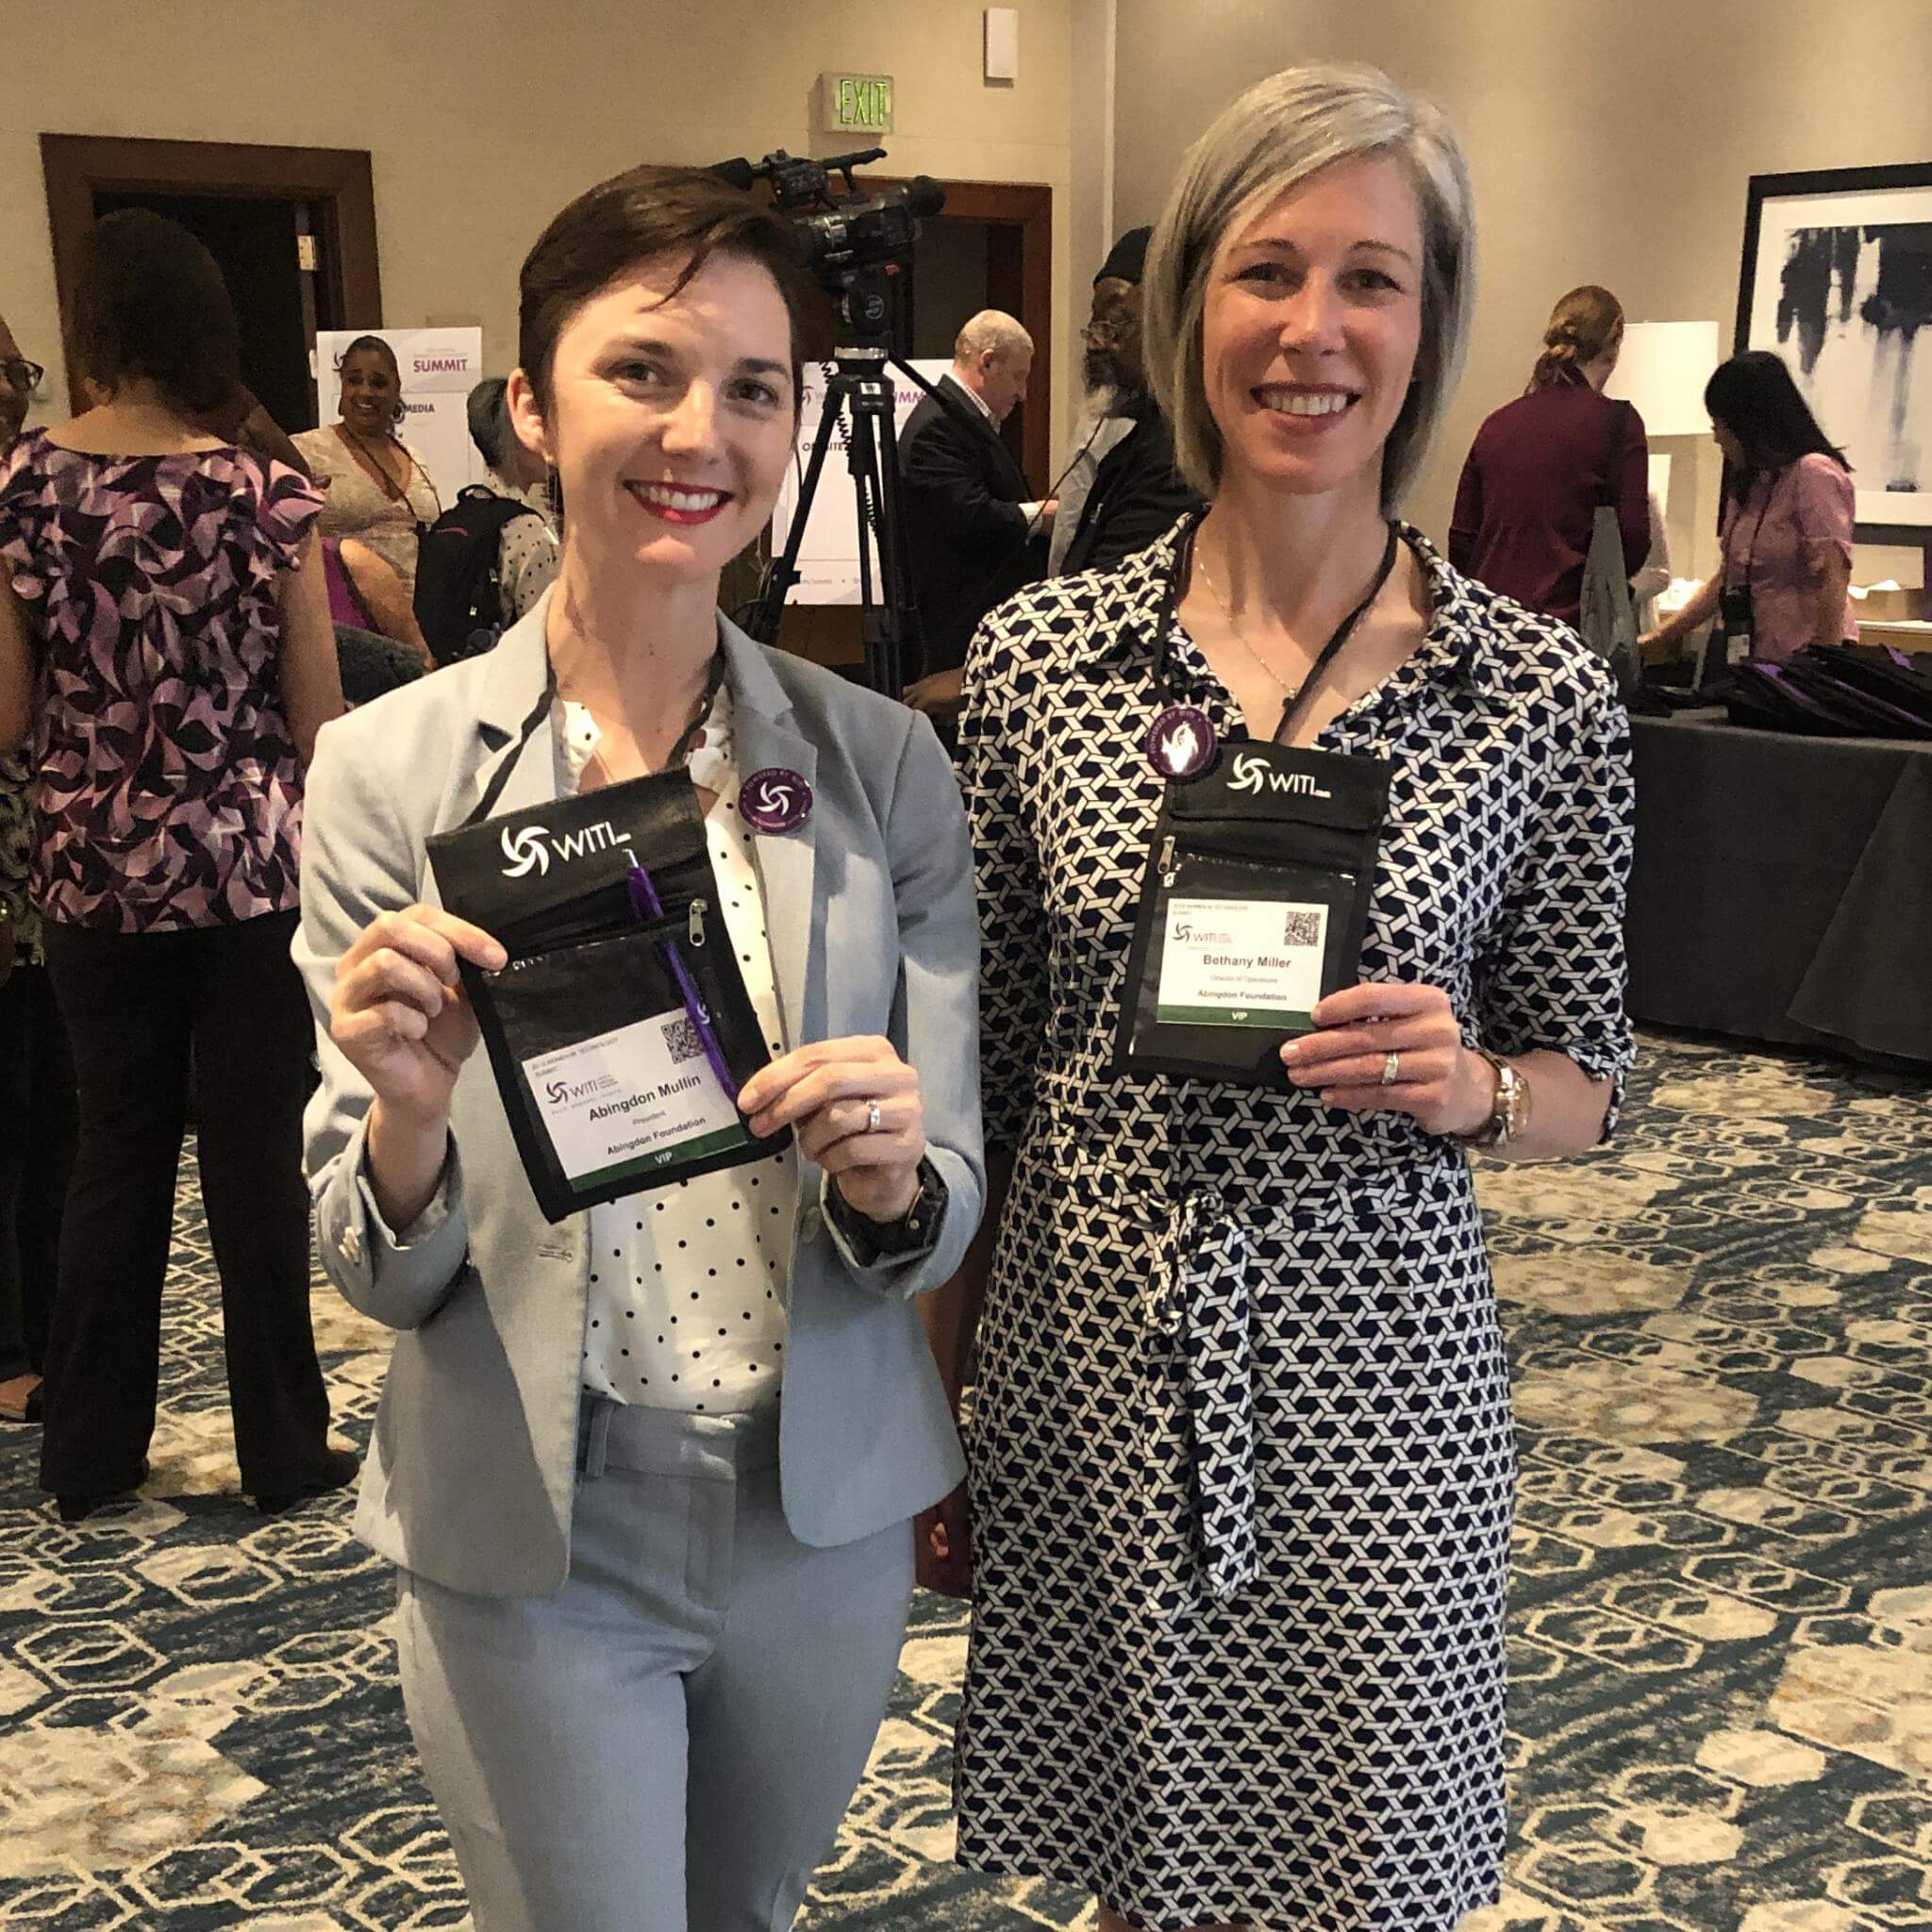 Abingdon Co. Image displays Abingdon Mullin and Bethany Miller representing Abingdon Foundation at Women In Technology International Conference. Both women are standing in a conference lobby holding their name badges to the camera. WITI